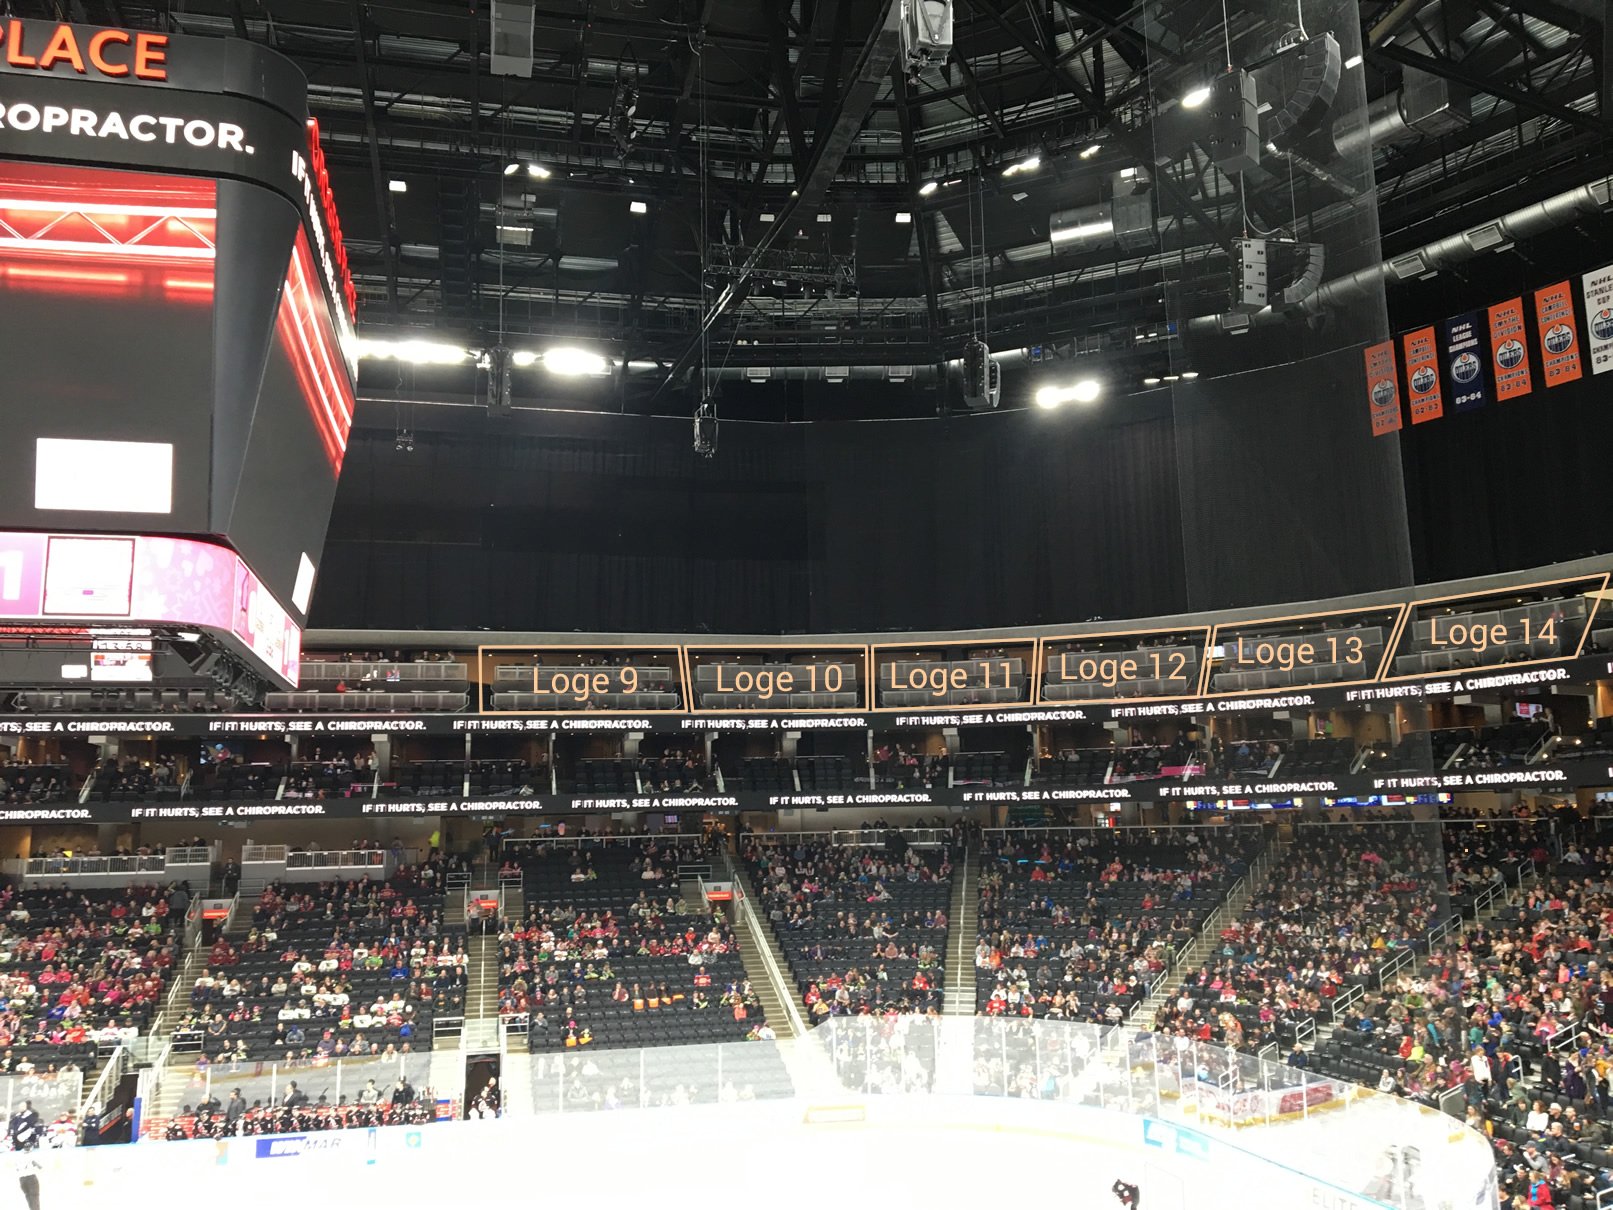 Loge Sections 9-14 at Rogers Place